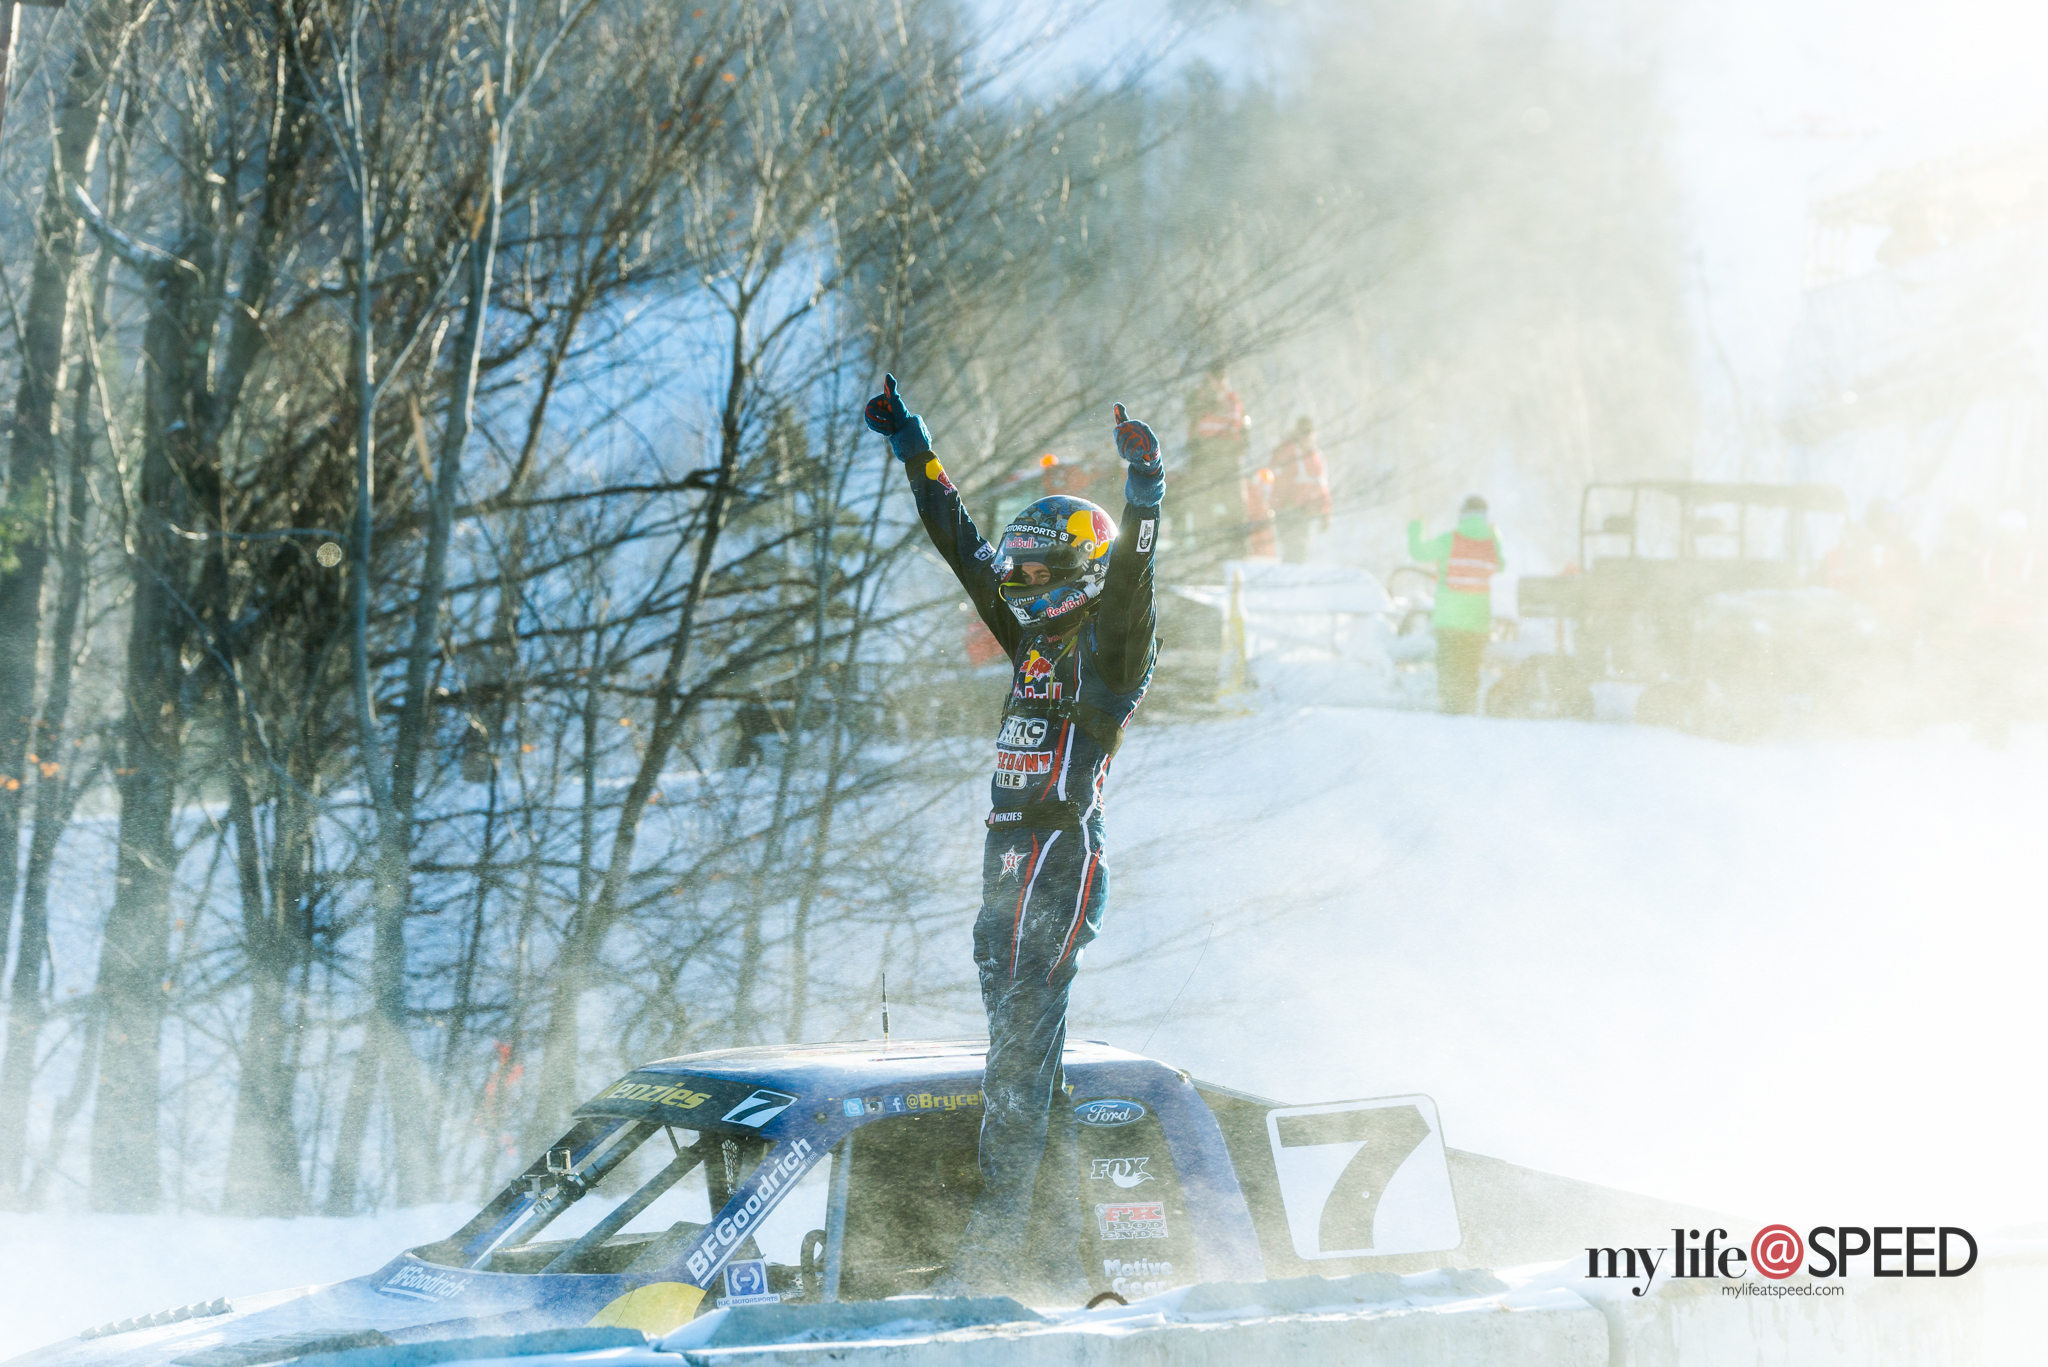 An elated Bryce Menzies is shrouded in a swath of snow as he celebrates his victory for this years Frozen Rush Championship